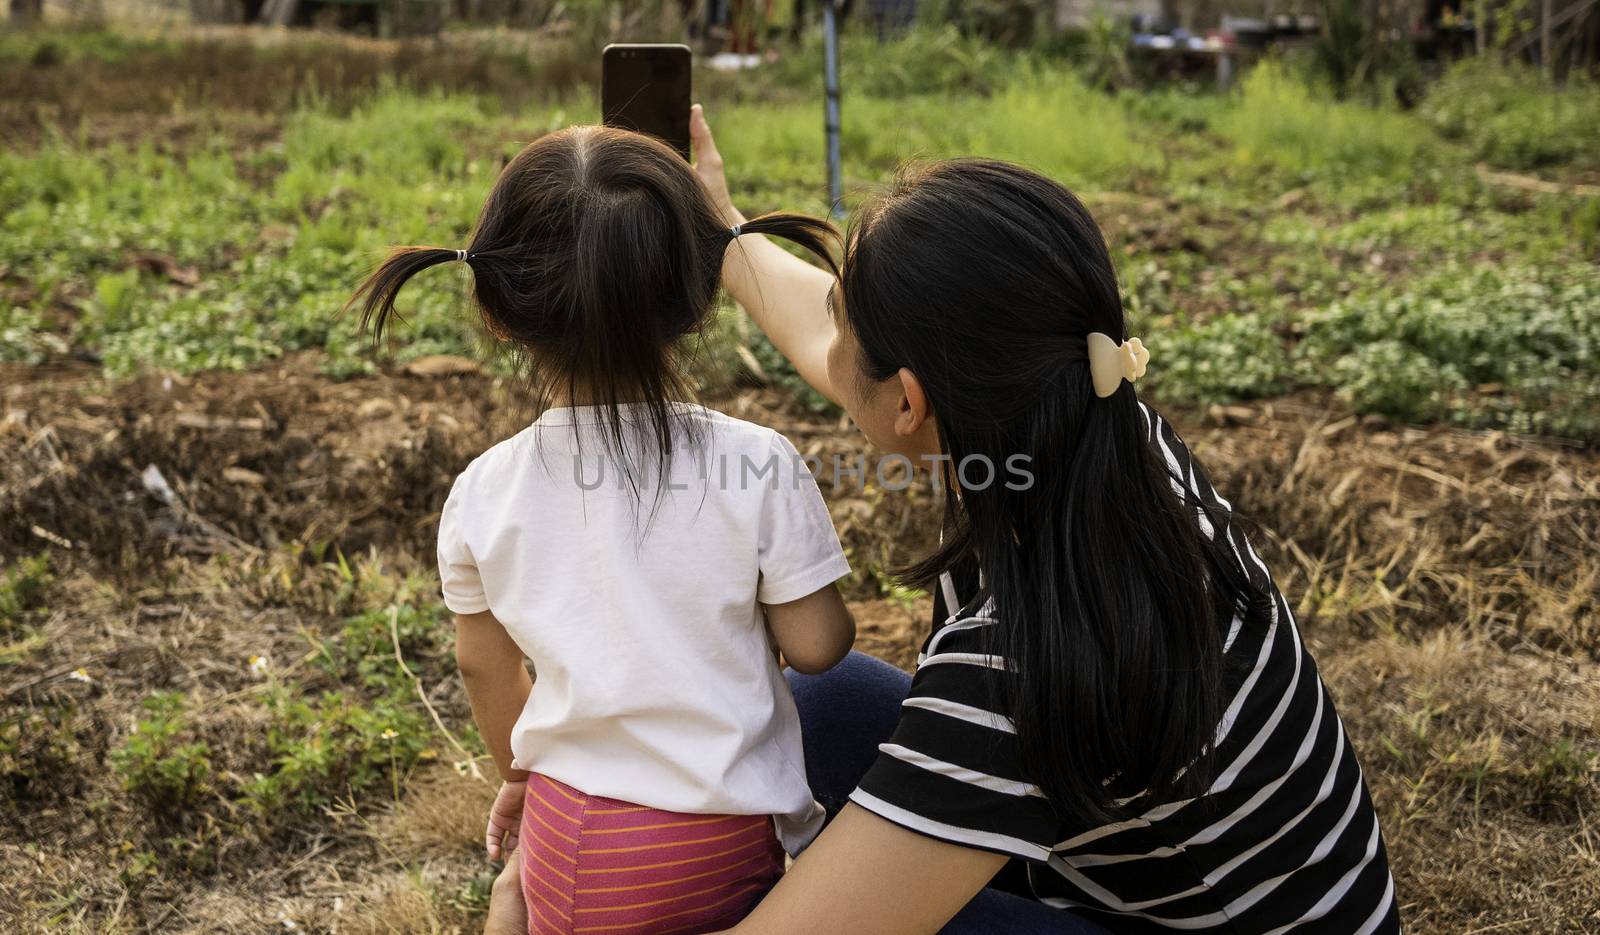 Back view of Asian little child girl taking a photo with mother in garden over sunset background.